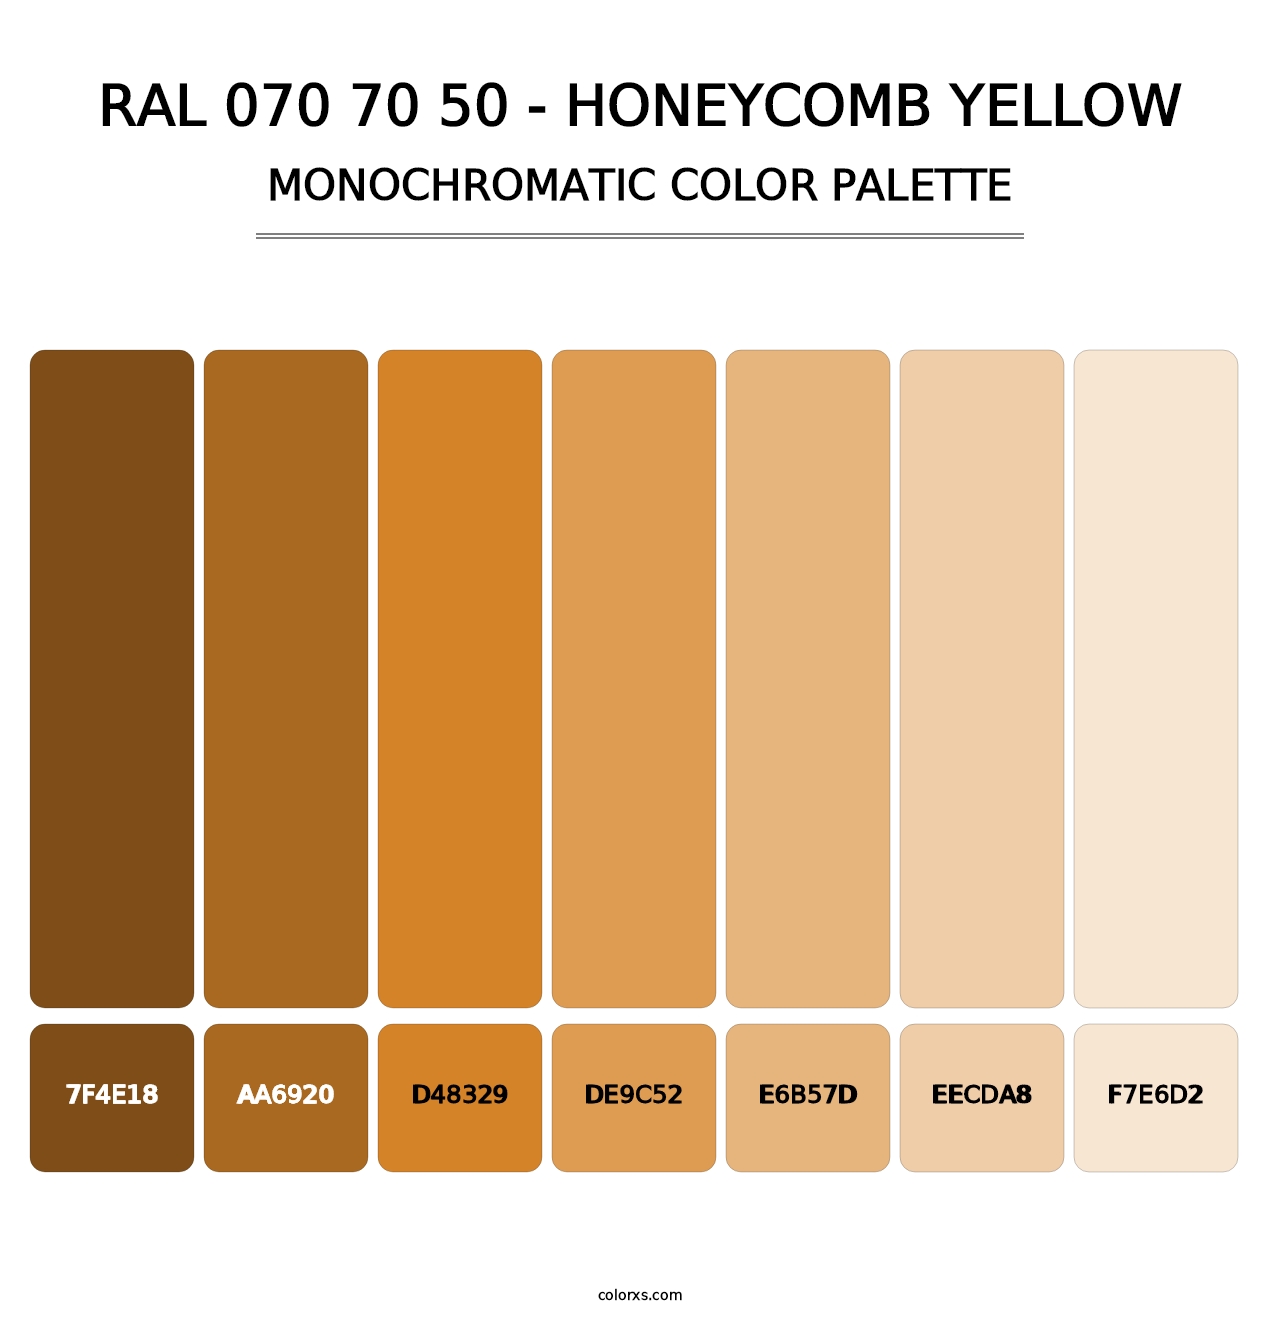 RAL 070 70 50 - Honeycomb Yellow - Monochromatic Color Palette